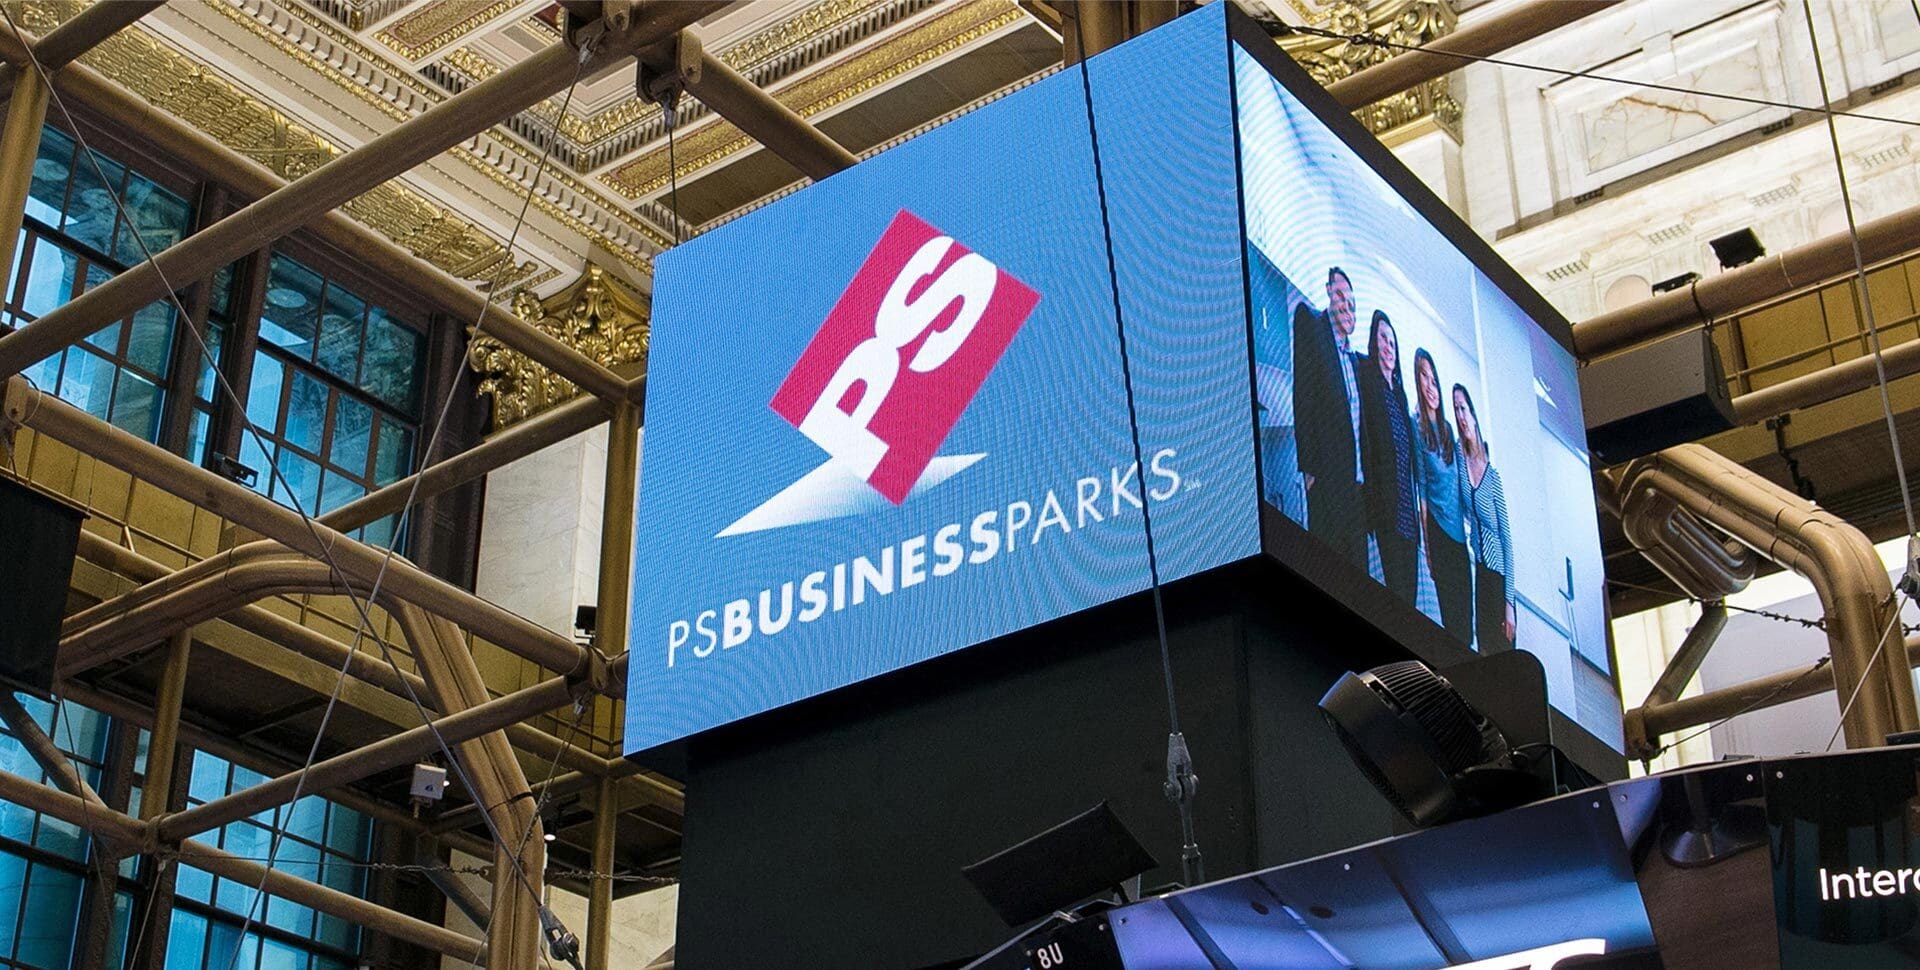 PS Business Parks Leadership Sign Photo